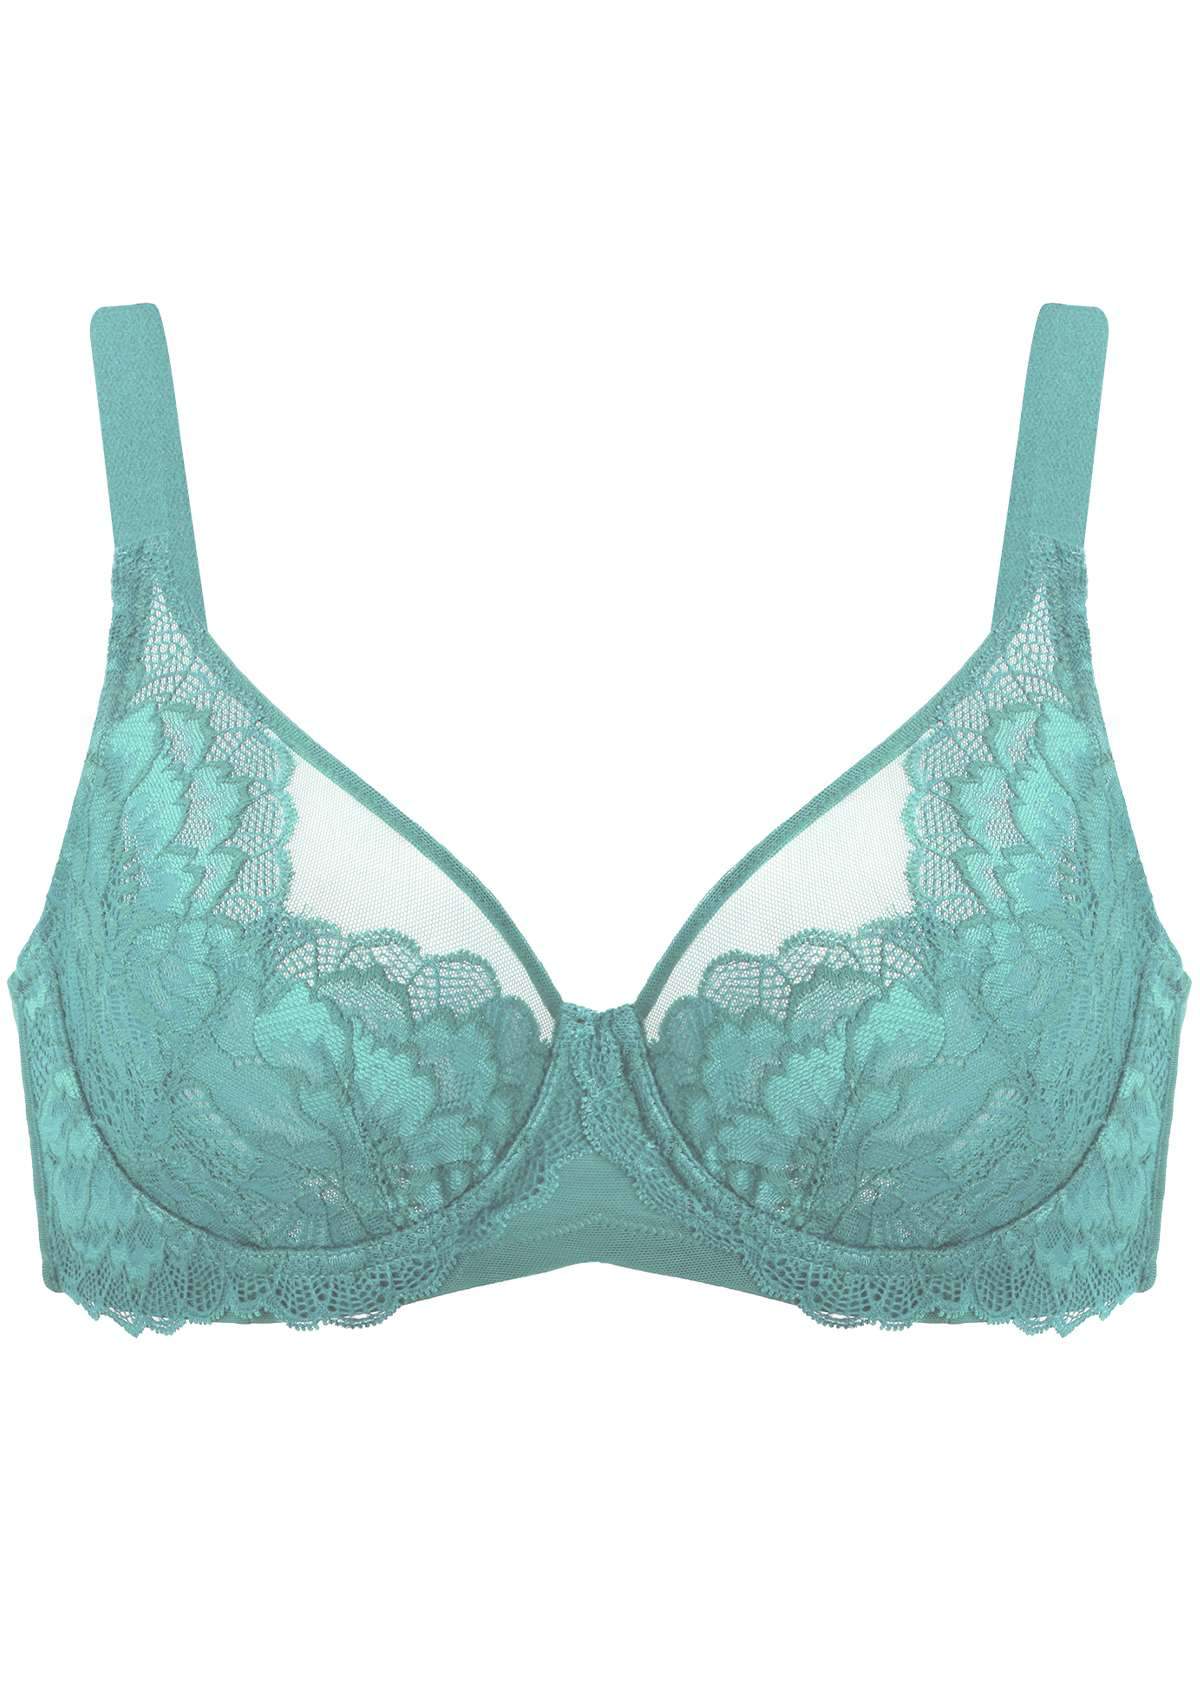 HSIA Paeonia Lace Full Coverage Underwire Non-Padded Uplifting Bra - Light Coral / 34 / D